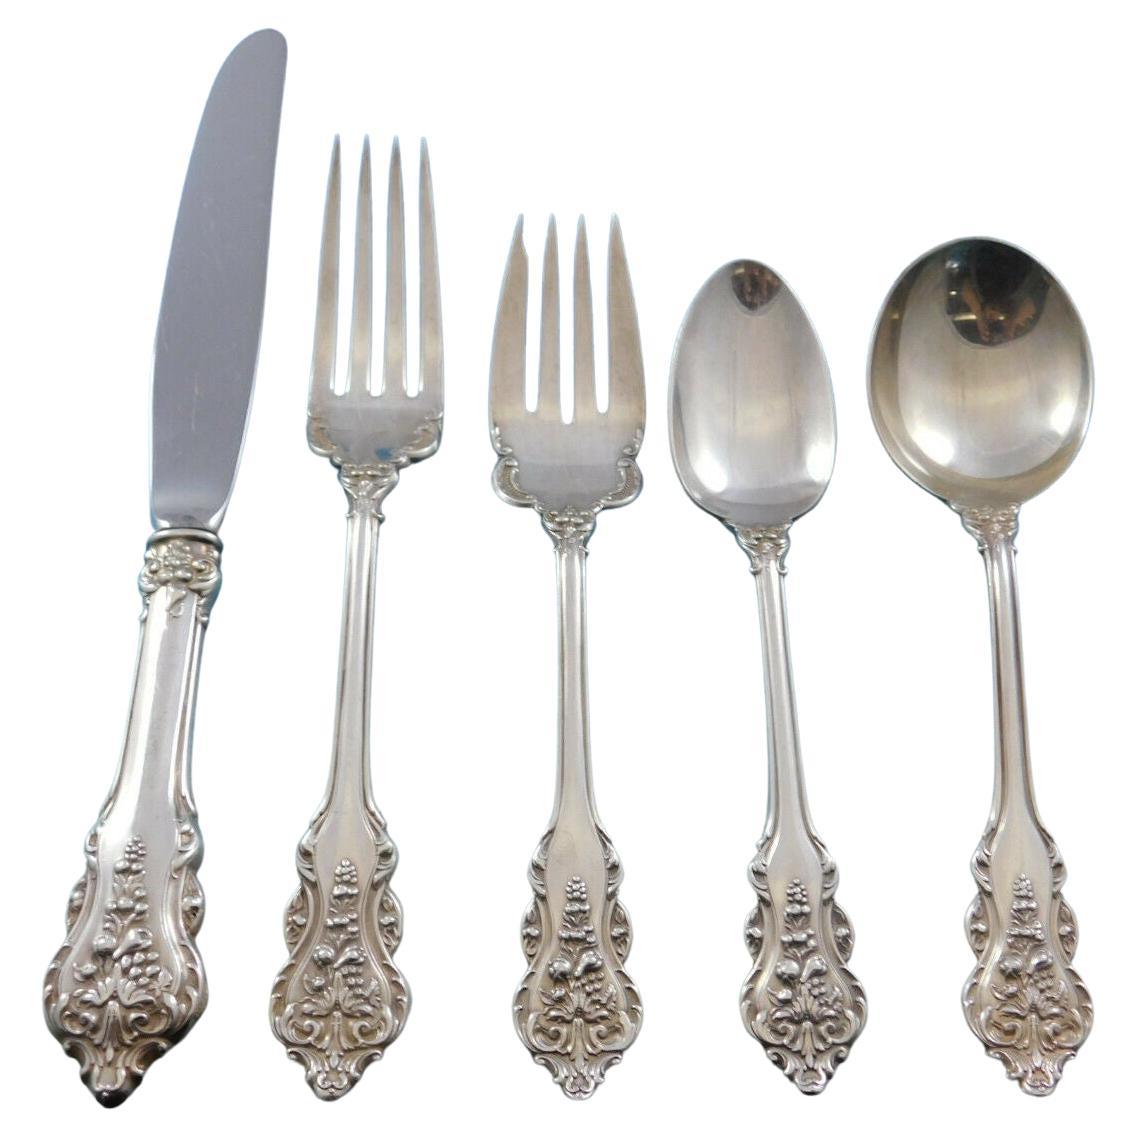 Donatello by Amston Sterling Silver Flatware Set for 8 Service 43 Pieces